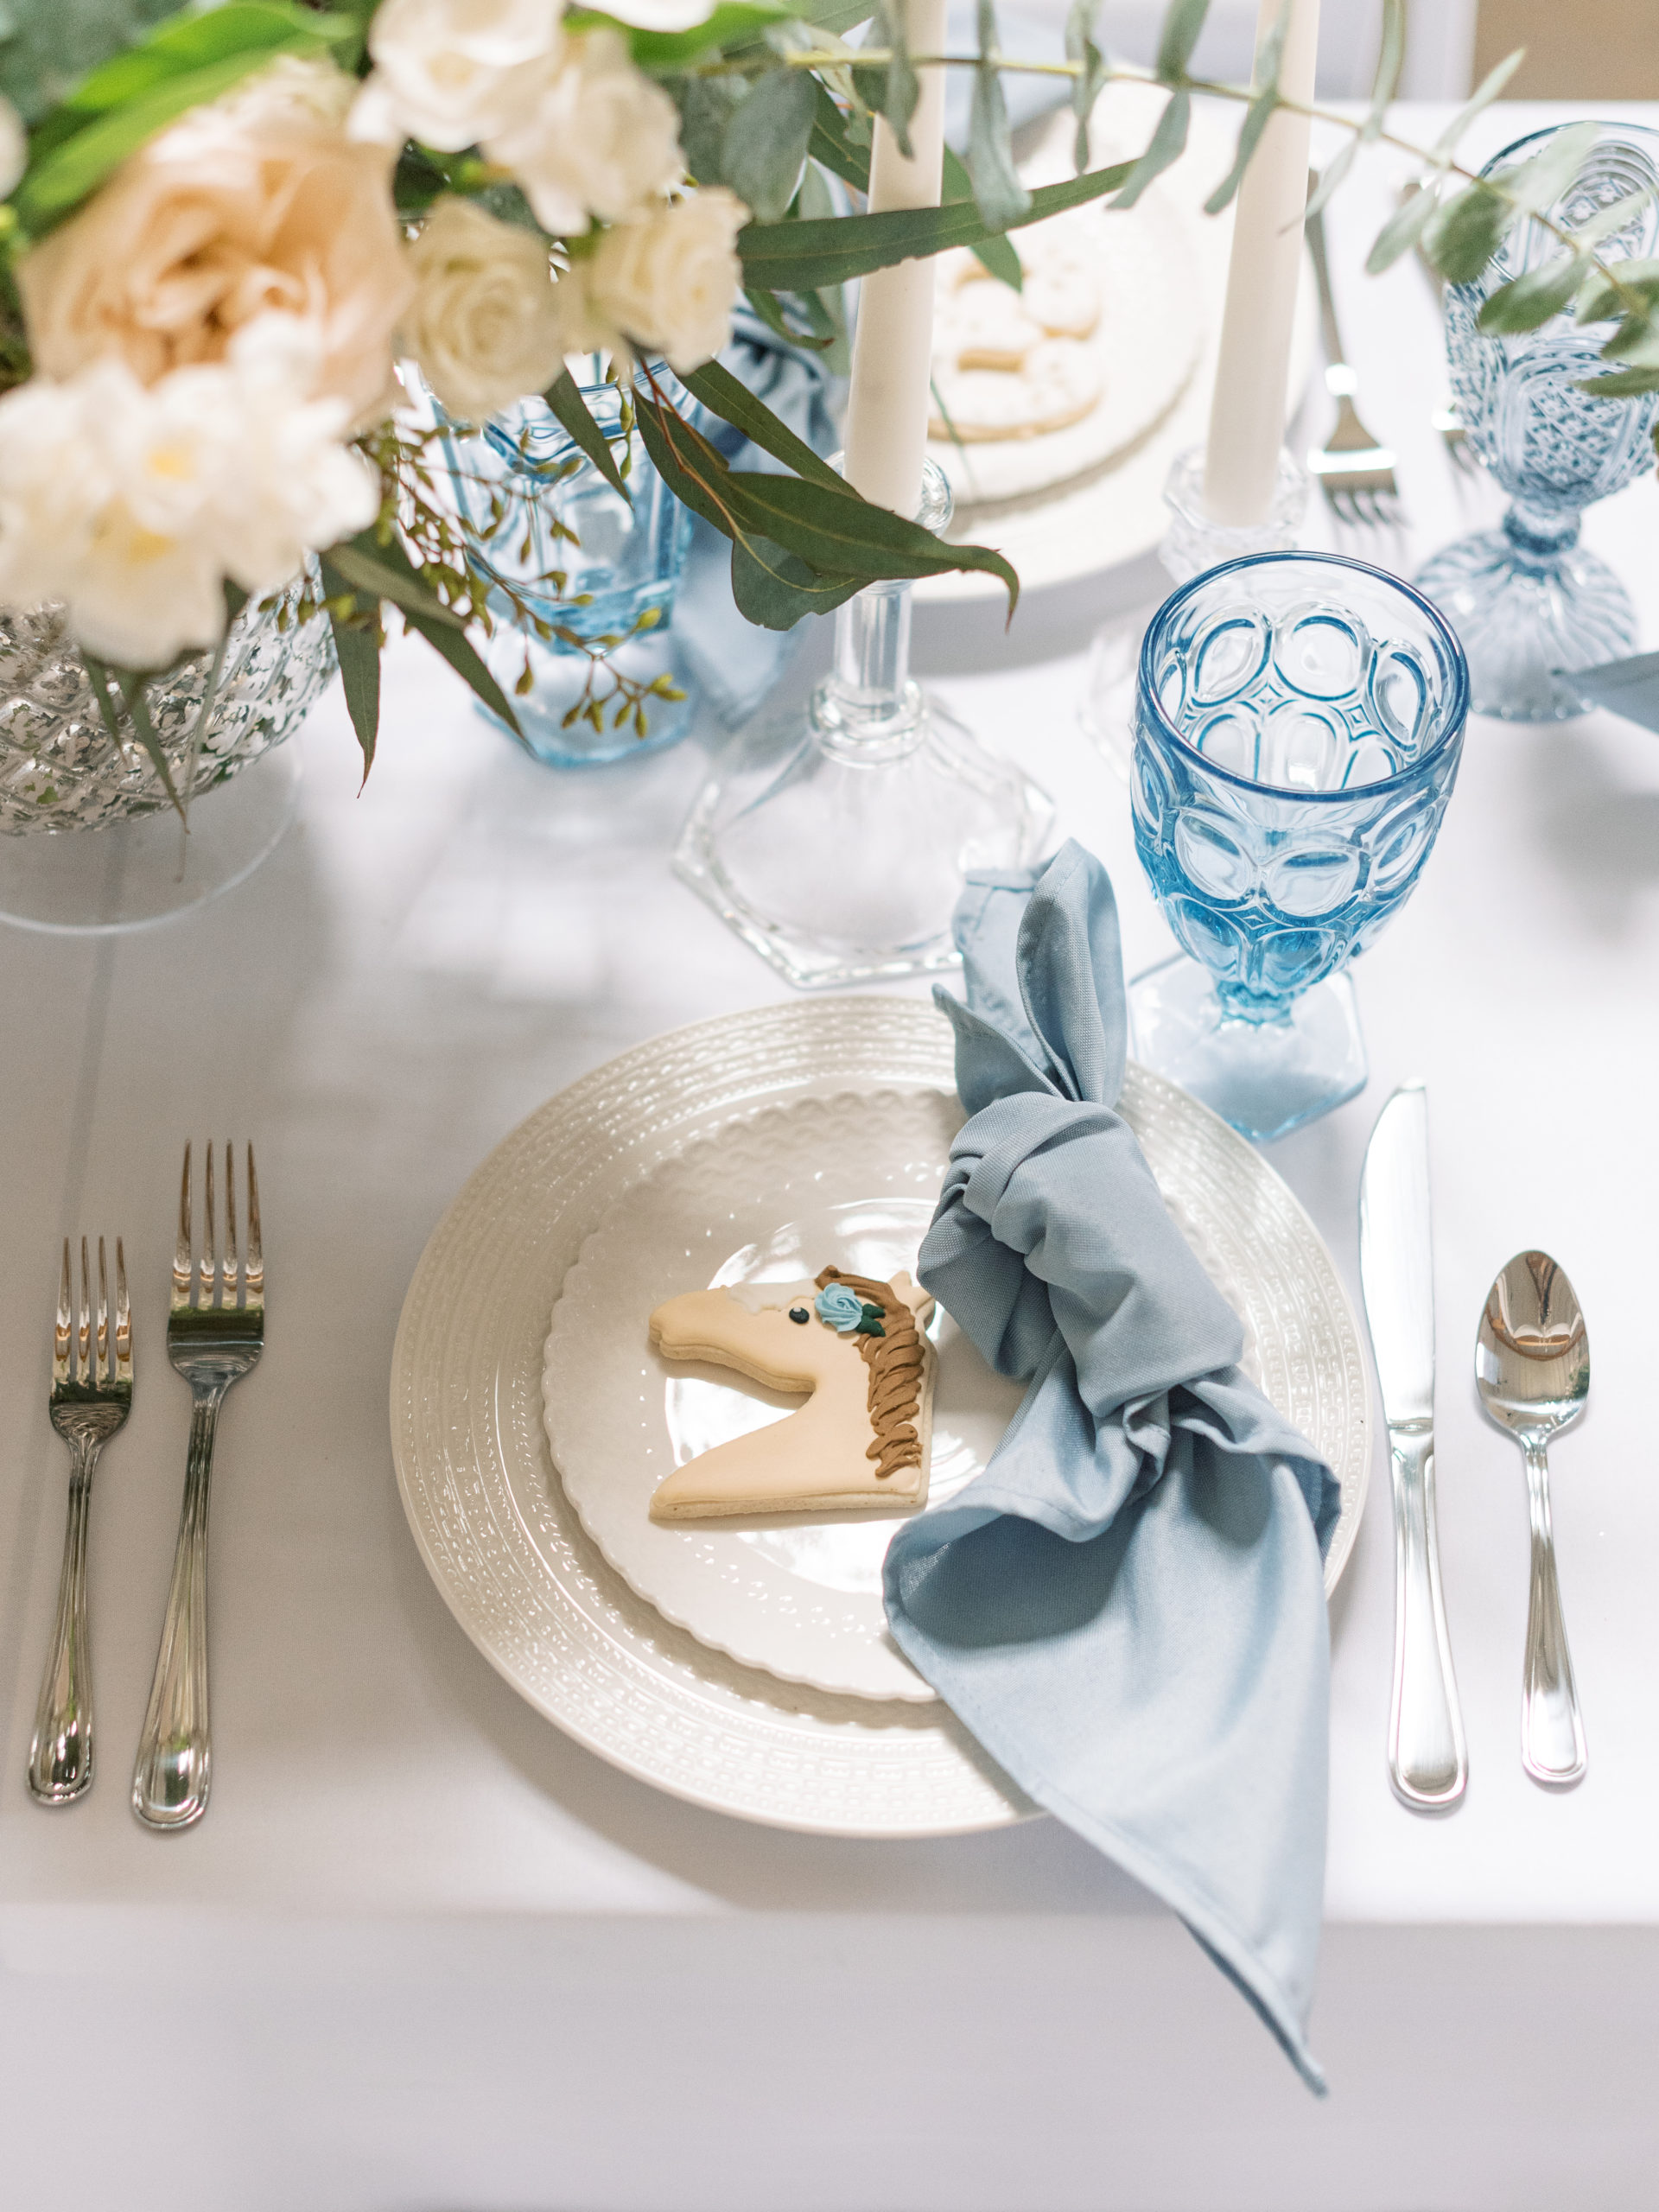  beautiful white plates, blue napkins, blue goblets and a cute horse cookie